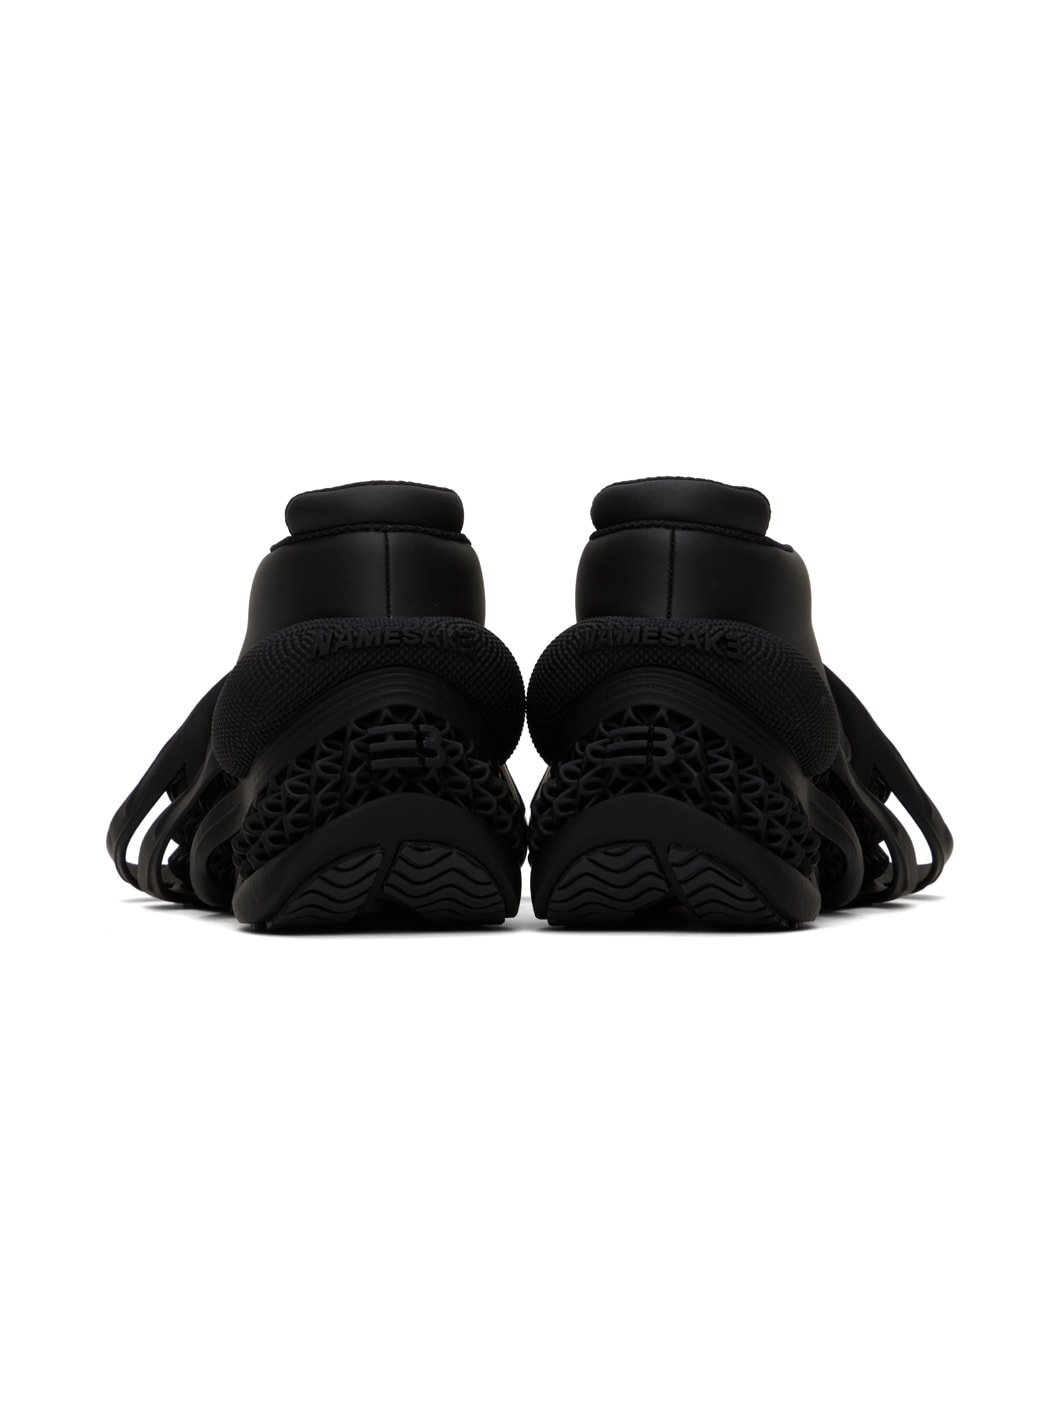 Black Clippers 8000 Sneakers - 2